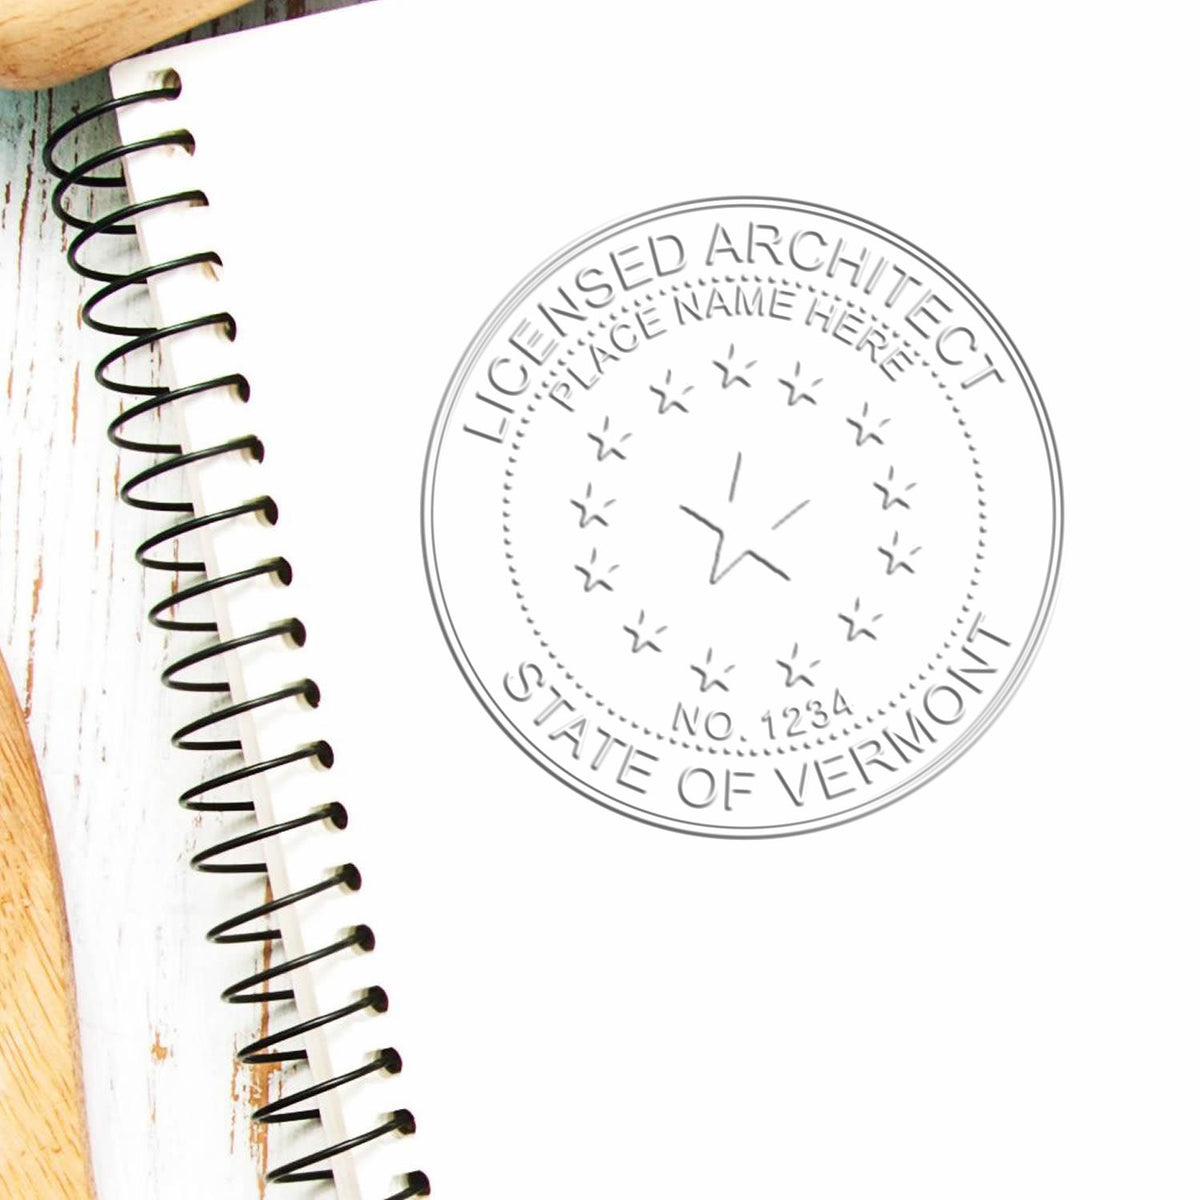 The State of Vermont Architectural Seal Embosser stamp impression comes to life with a crisp, detailed photo on paper - showcasing true professional quality.